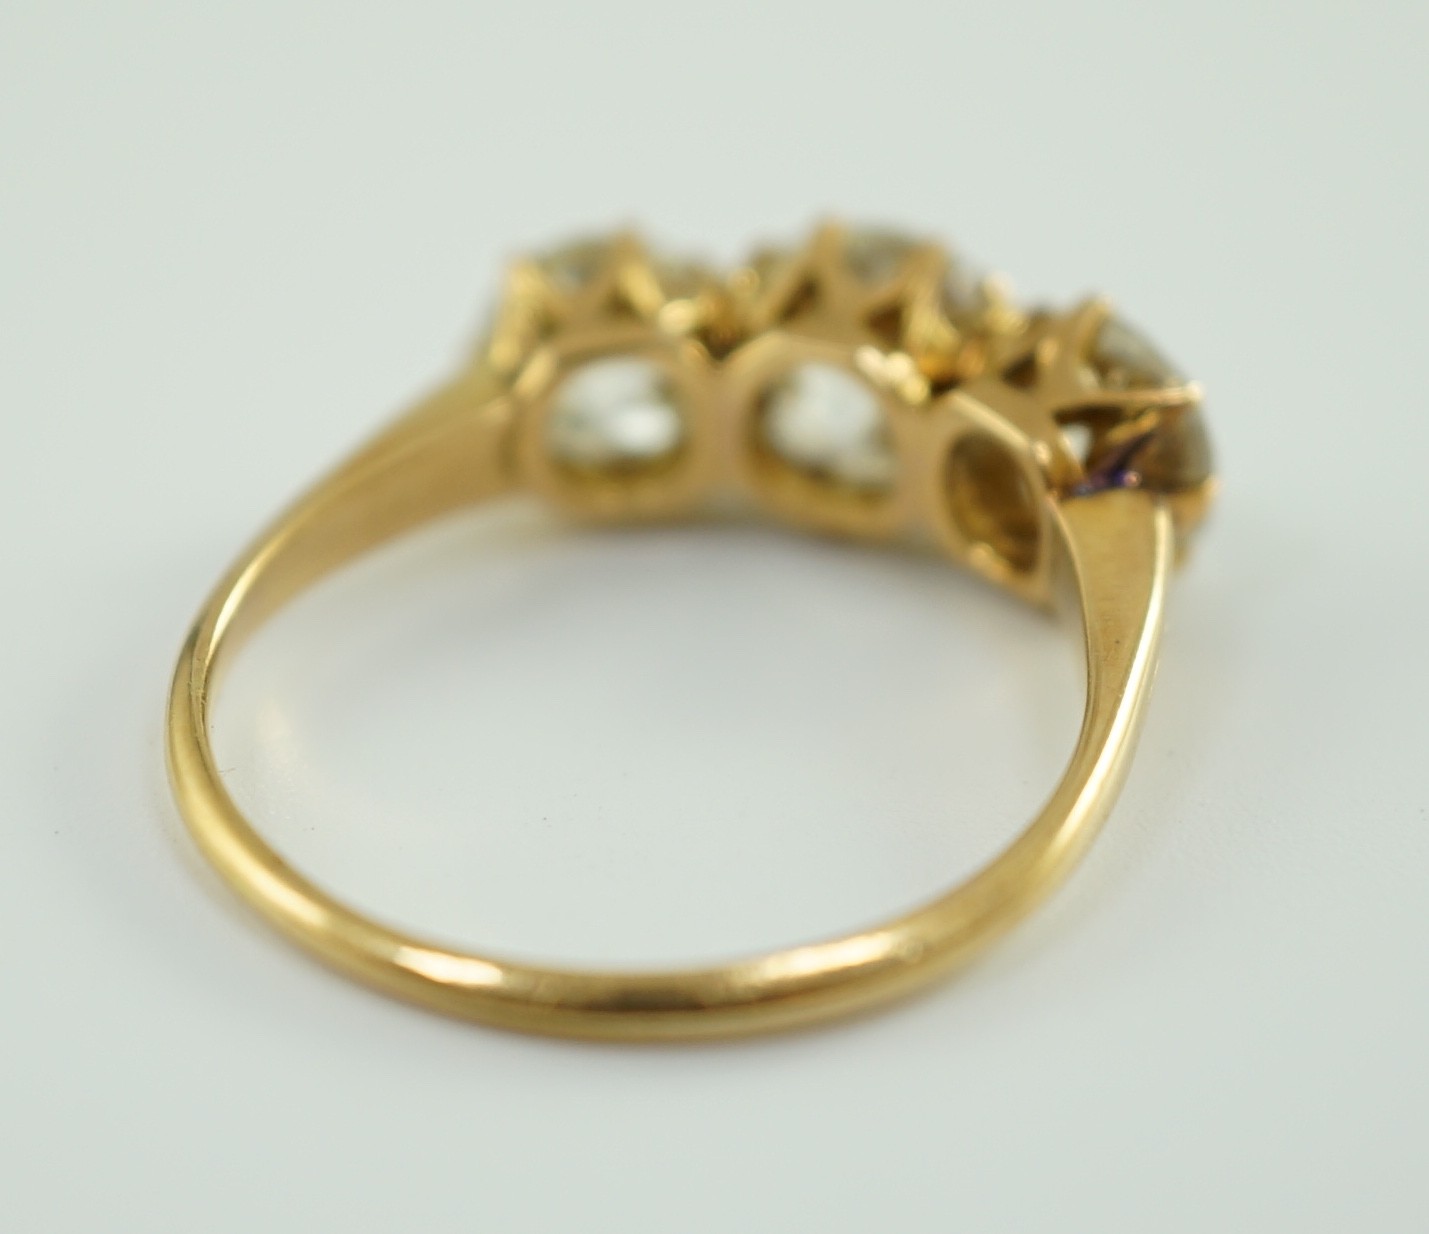 A gold and three stone diamond ring